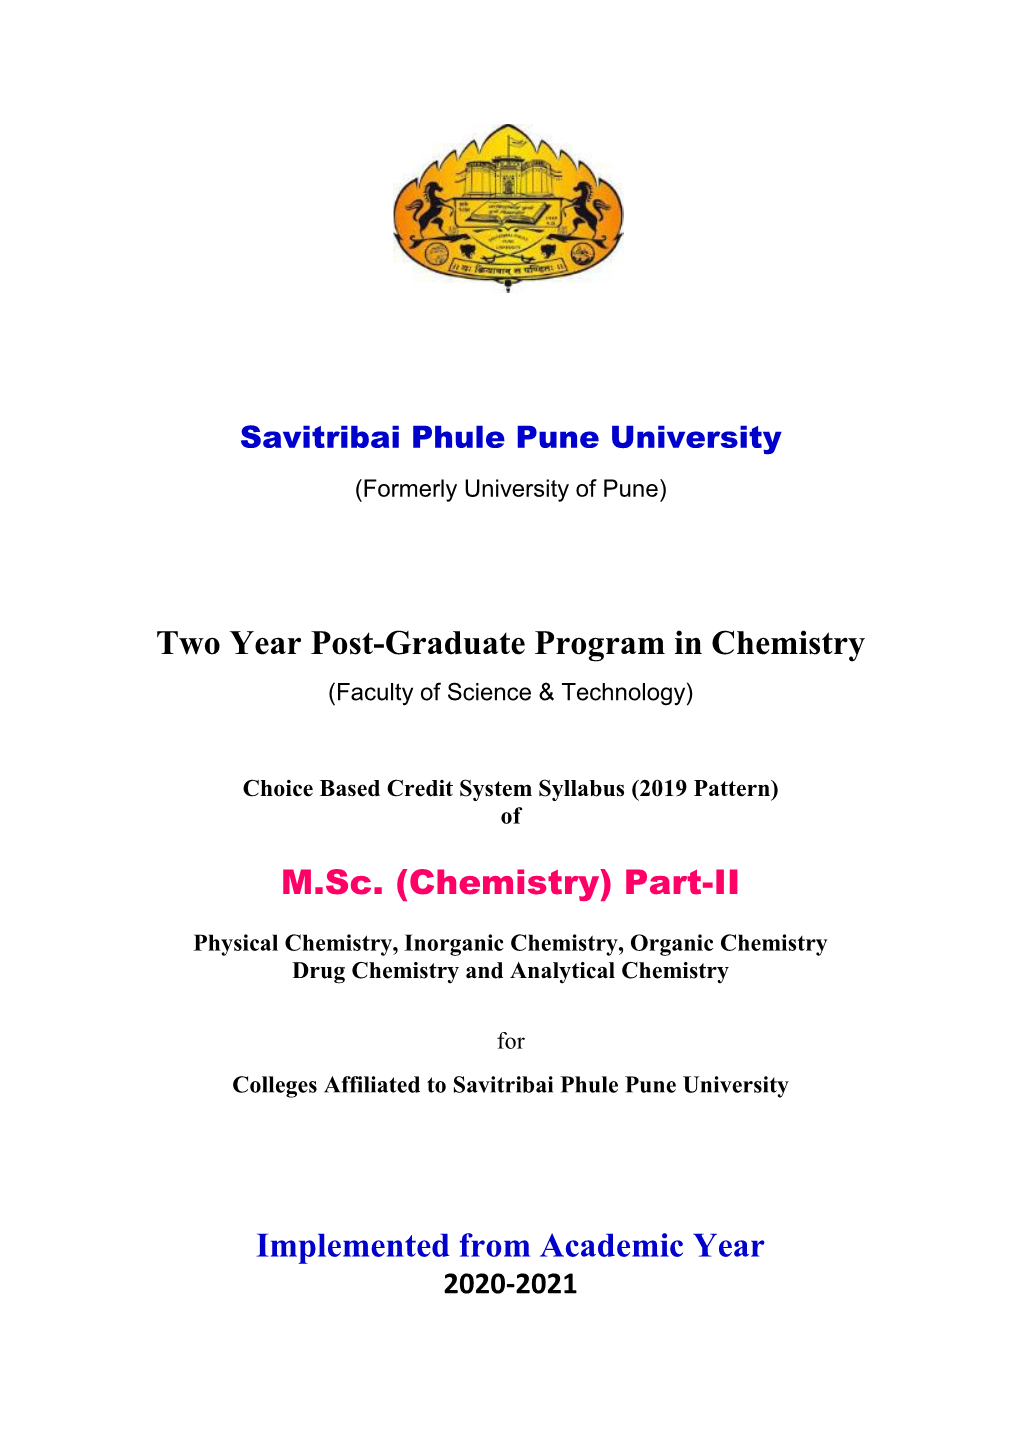 Chemistry (Faculty of Science & Technology)